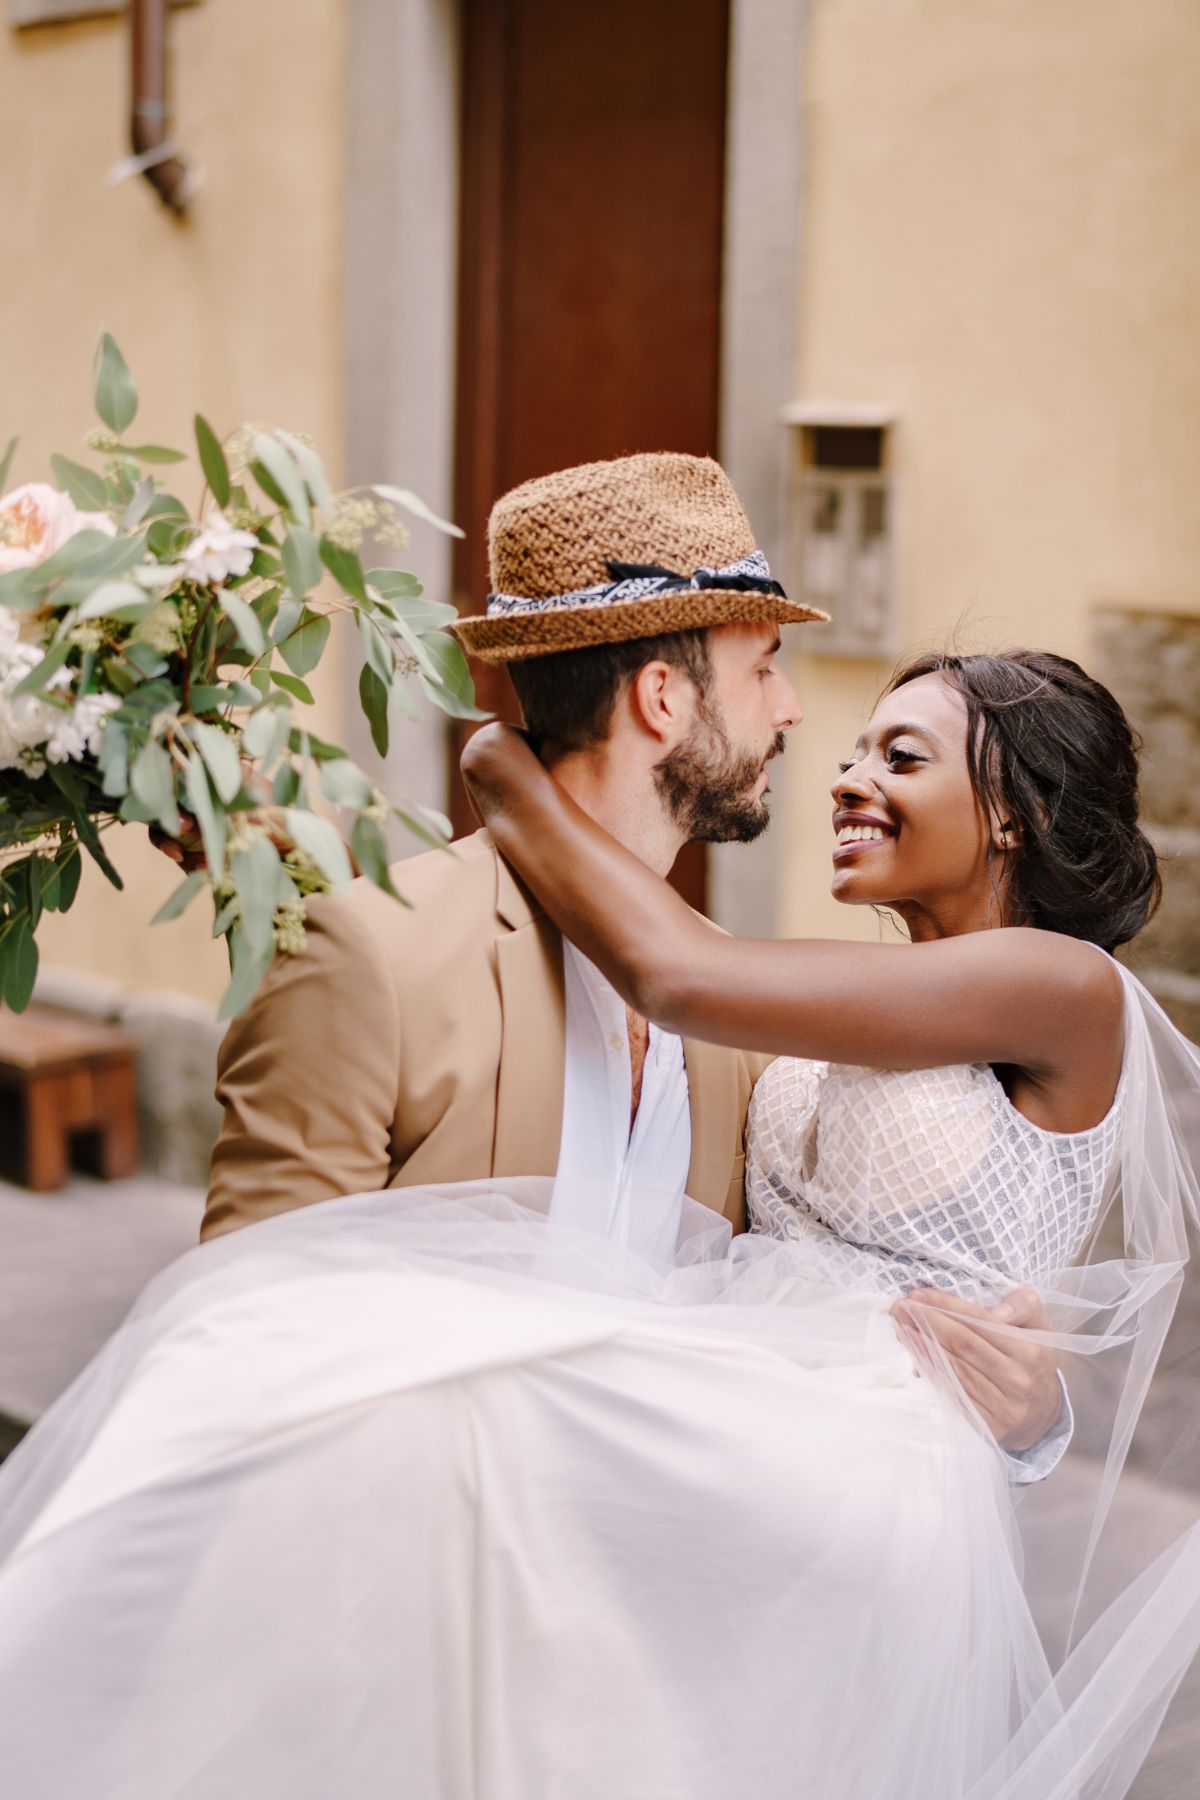 Intimate Wedding: How To Make It Luxurious